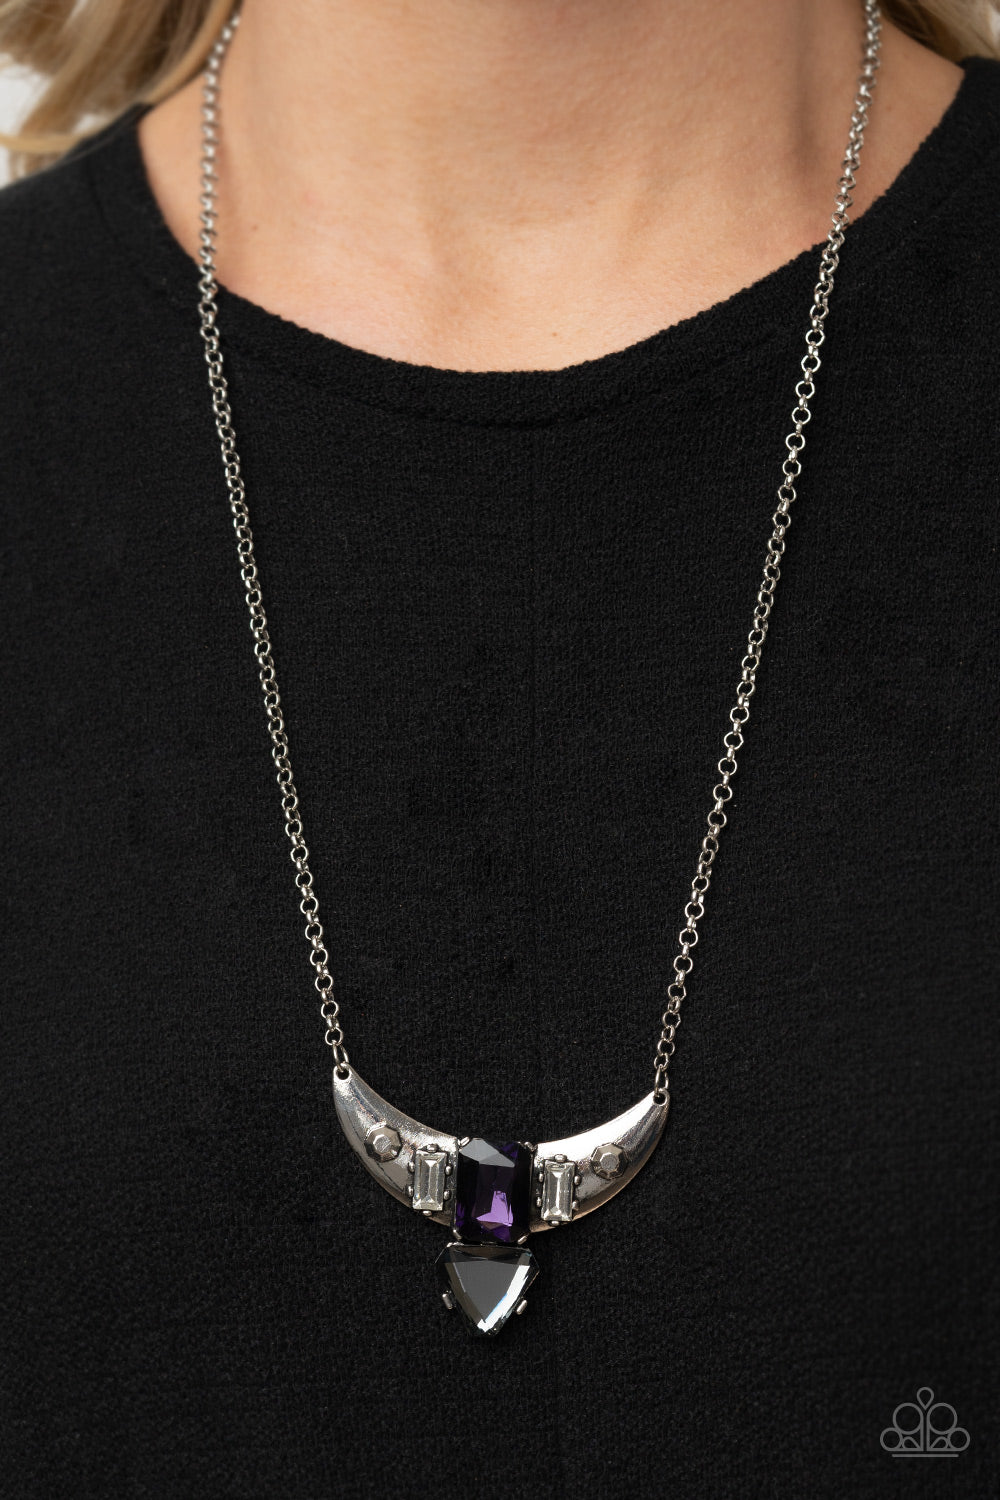 You the TALISMAN! - Purple Necklaces pairs of faceted silver beads and glassy white emerald cut gems flank an oversized emerald cut purple gem atop an antiqued silver half moon frame. A smoky triangular cut gem adorns the bottom of the pendant, creating a twinkly talisman at the bottom of a classic silver chain. Features an adjustable clasp closure. Includes one pair of matching earrings.  Paparazzi Jewelry is lead and nickel free so it's perfect for sensitive skin too!